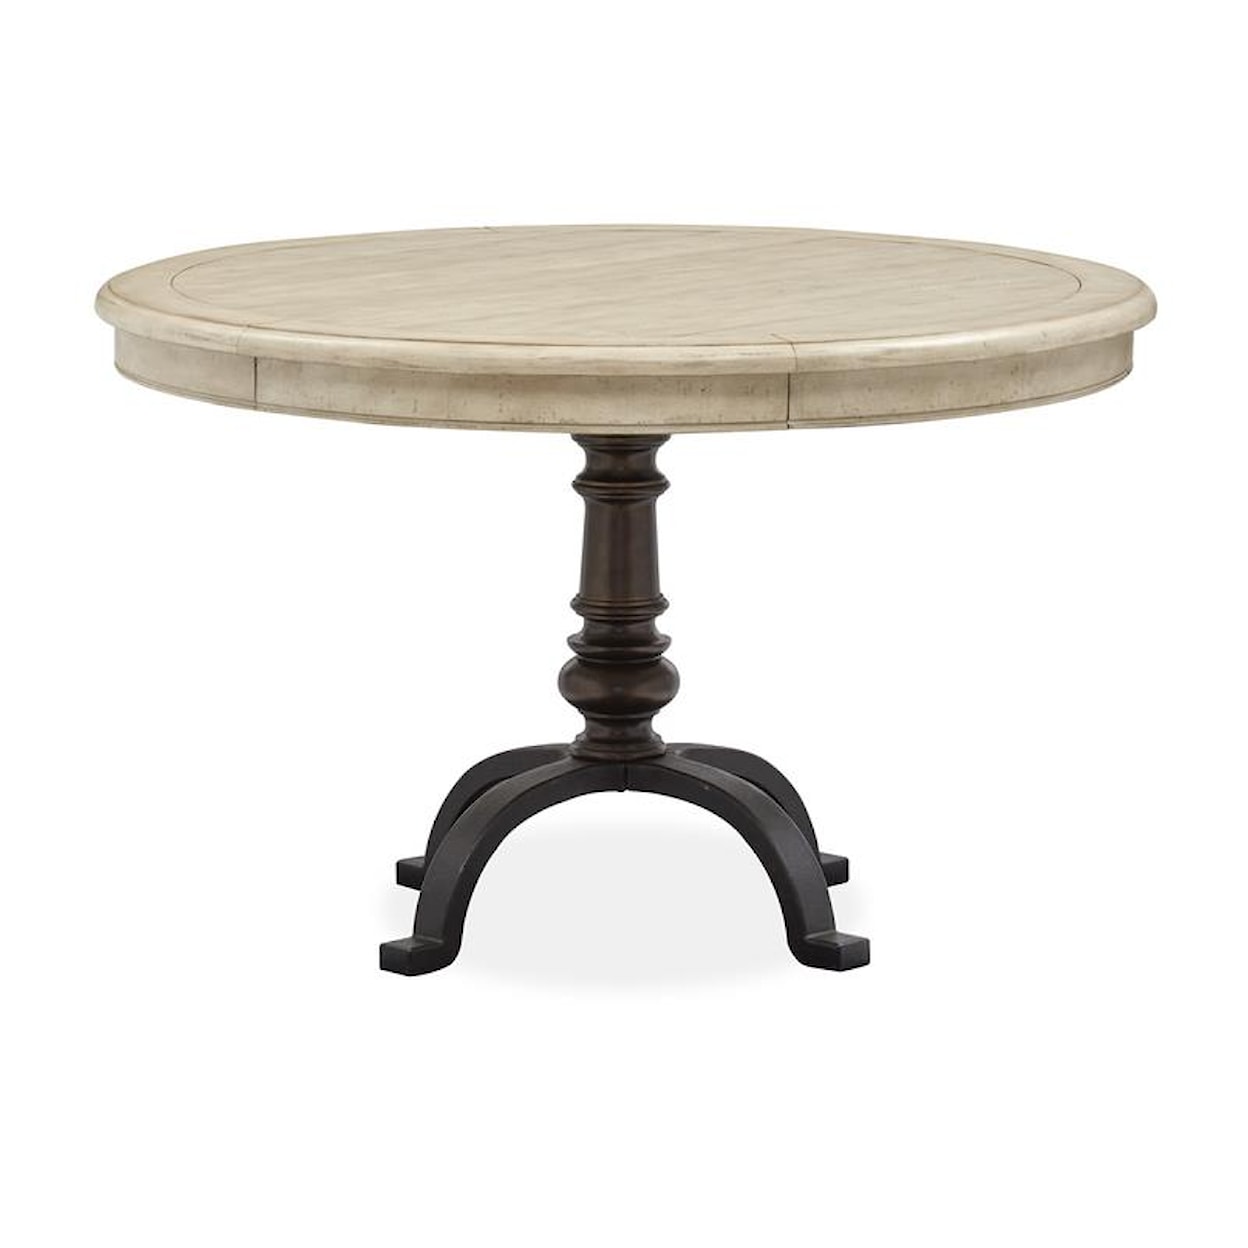 Magnussen Home Harlow Dining Round Dining Table